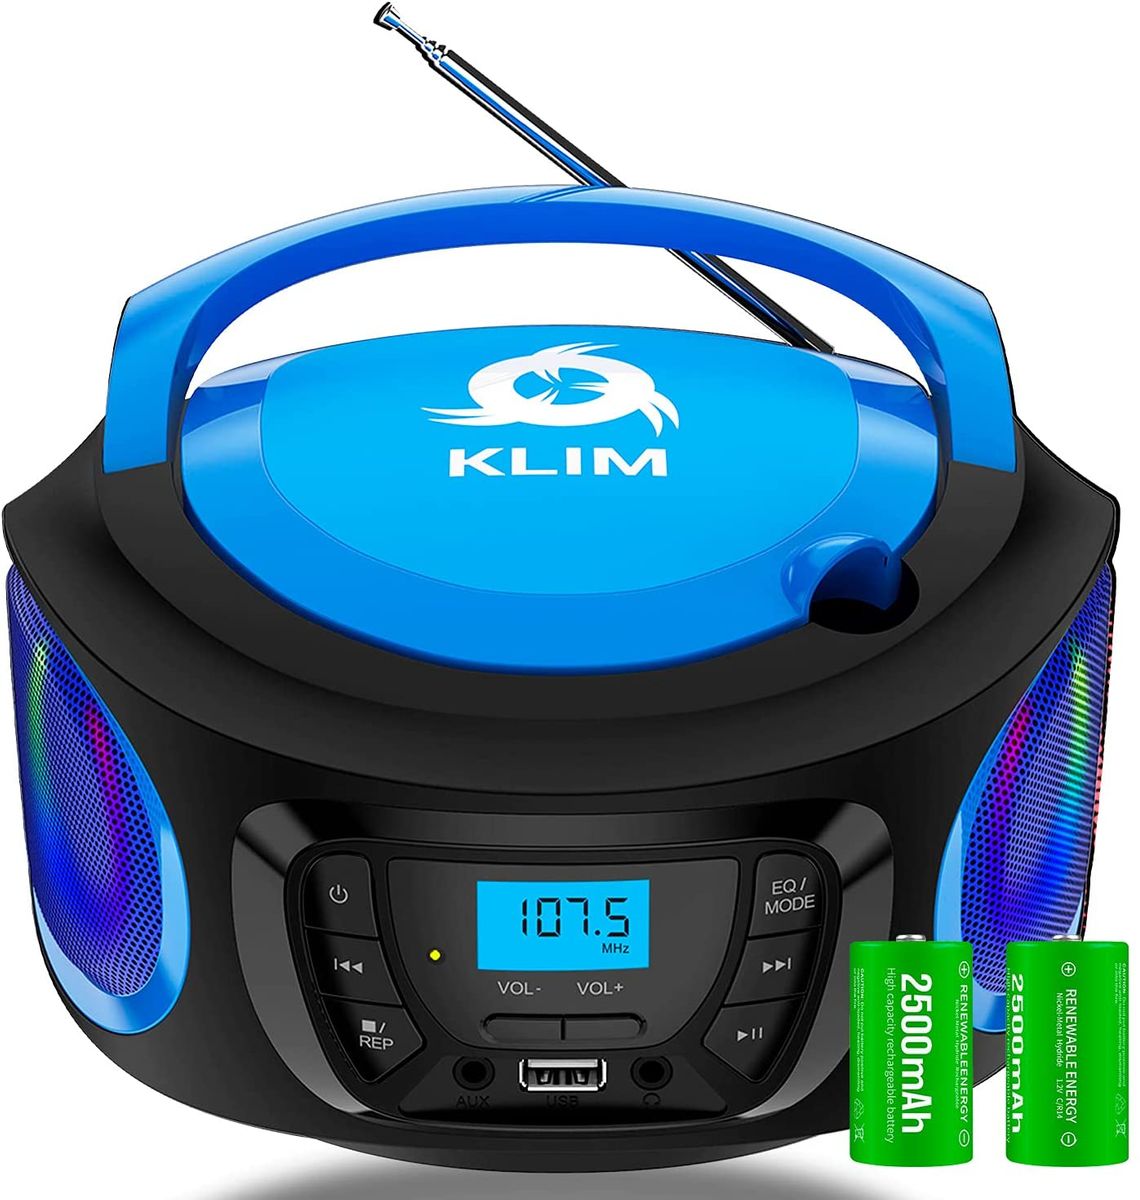 KLIM Boombox Radio with CD Player FM Radio, CD Player, Bluetooth, MP3, USB, AUX. Includes Rechargeable Batteries. Wired and Wireless Modes Blue